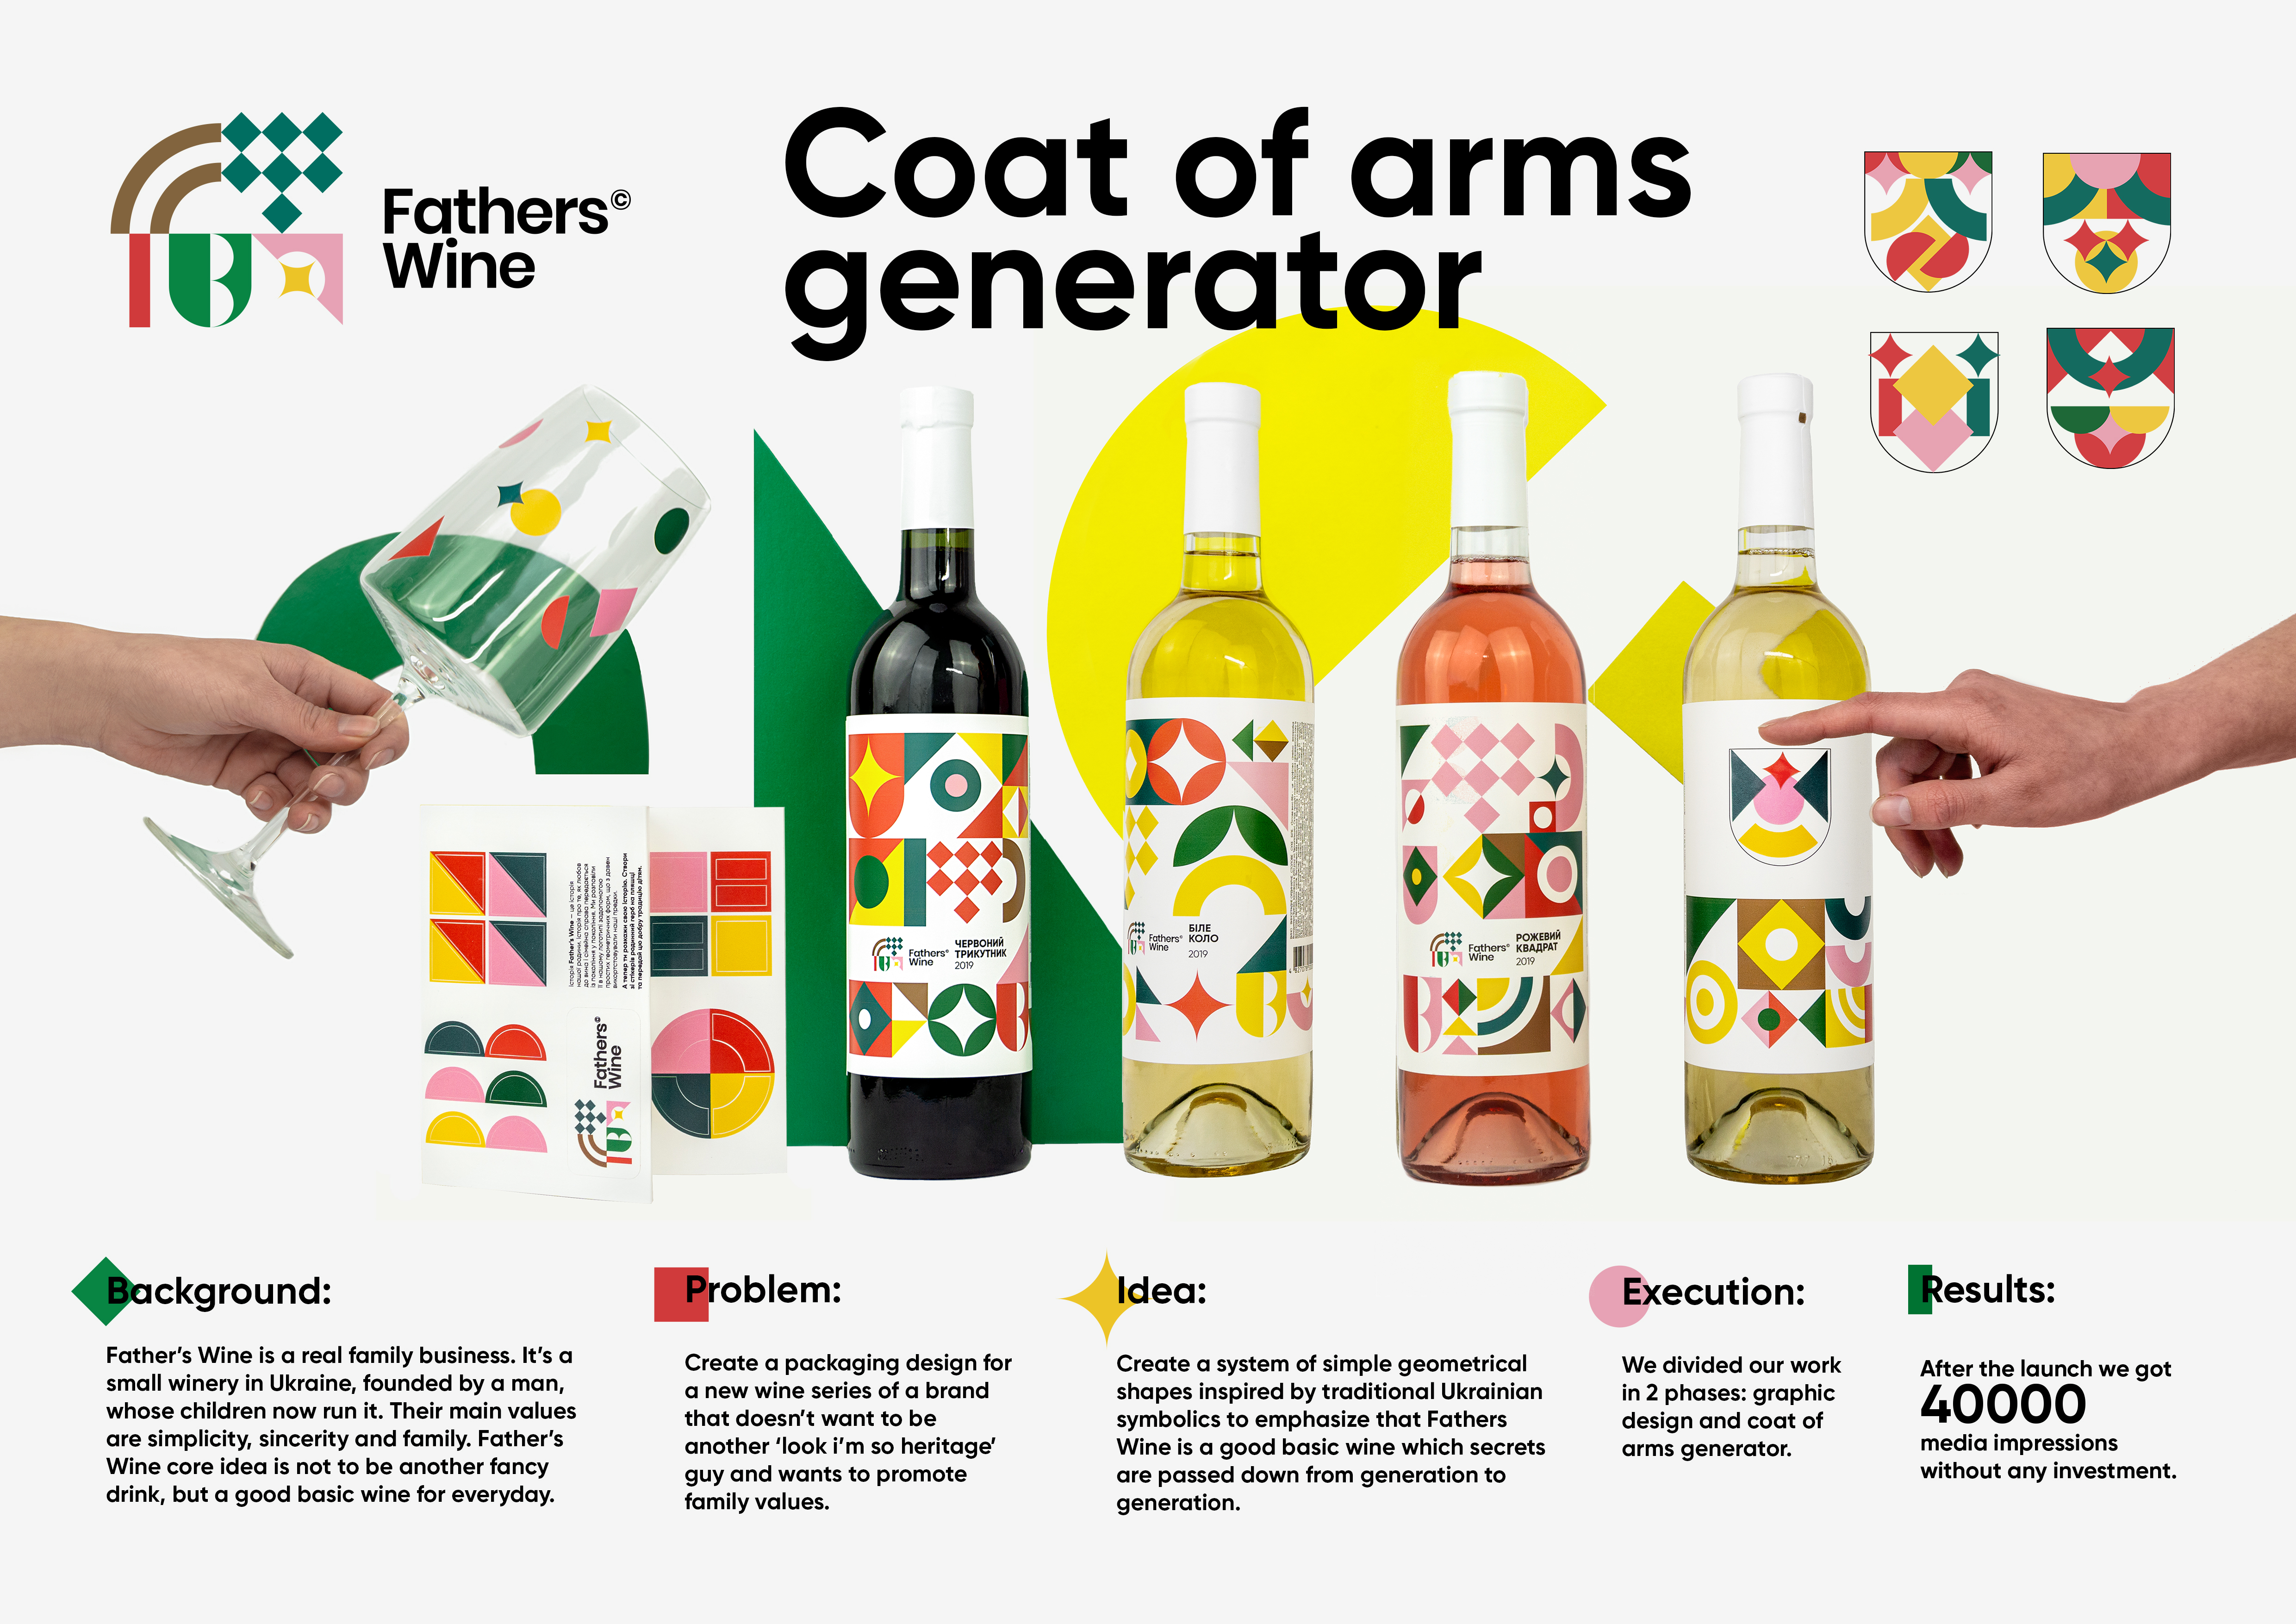 Fathers Wine. Coat of arms generator.